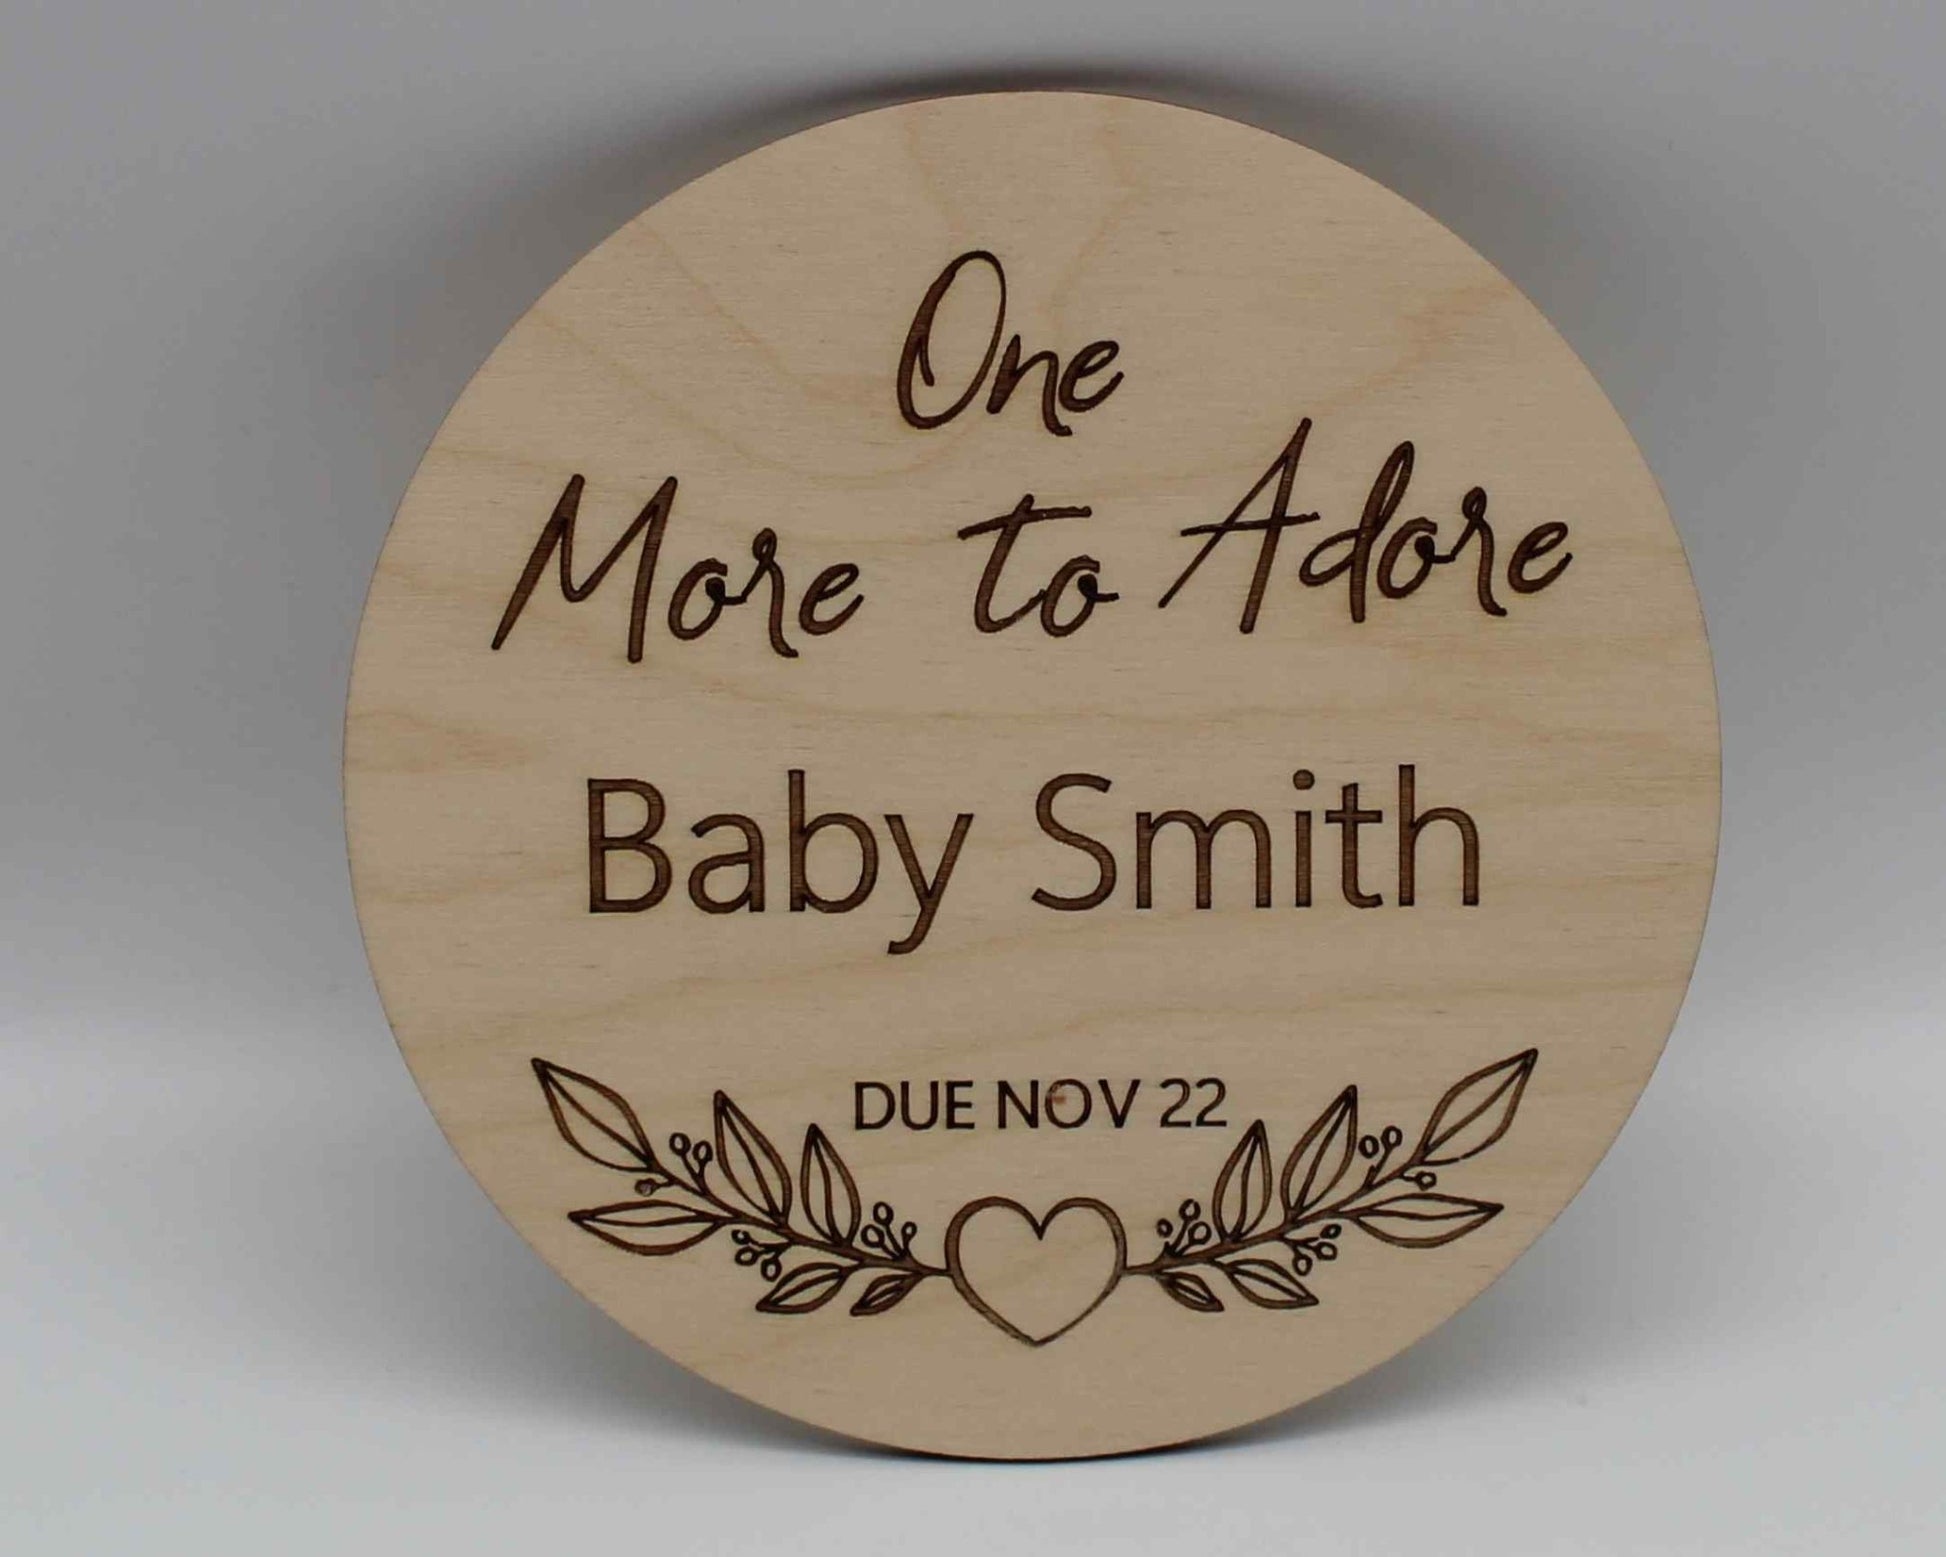 One More To Adore Announcement Disc Personalised - Haisley Design